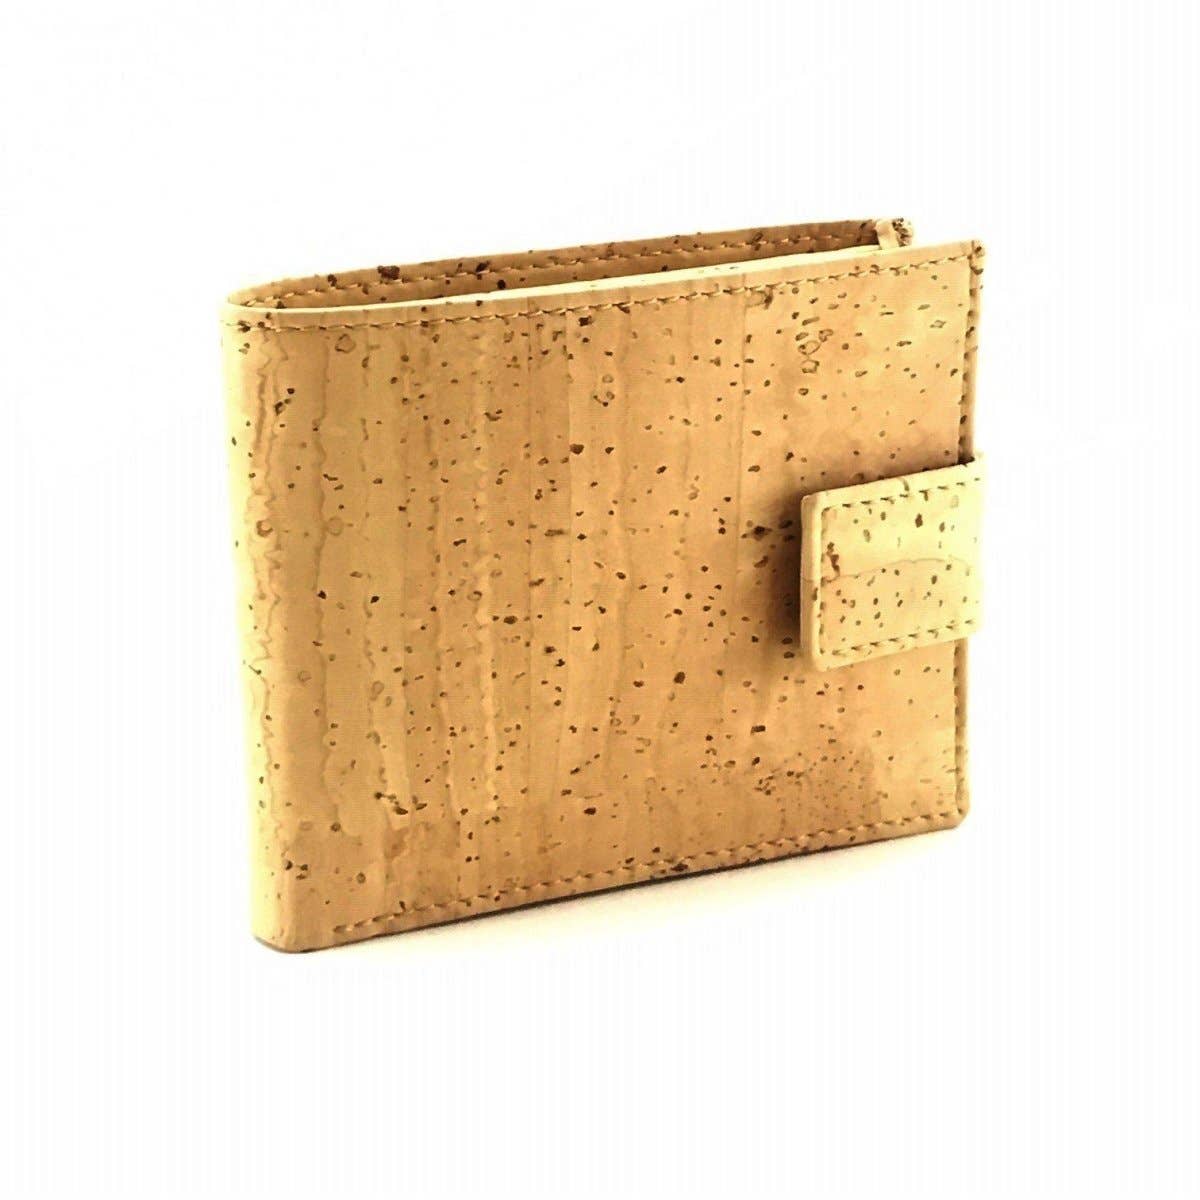 Mens Cork Wallet Compact Vegan Wallet with Clasp for Men In Natural